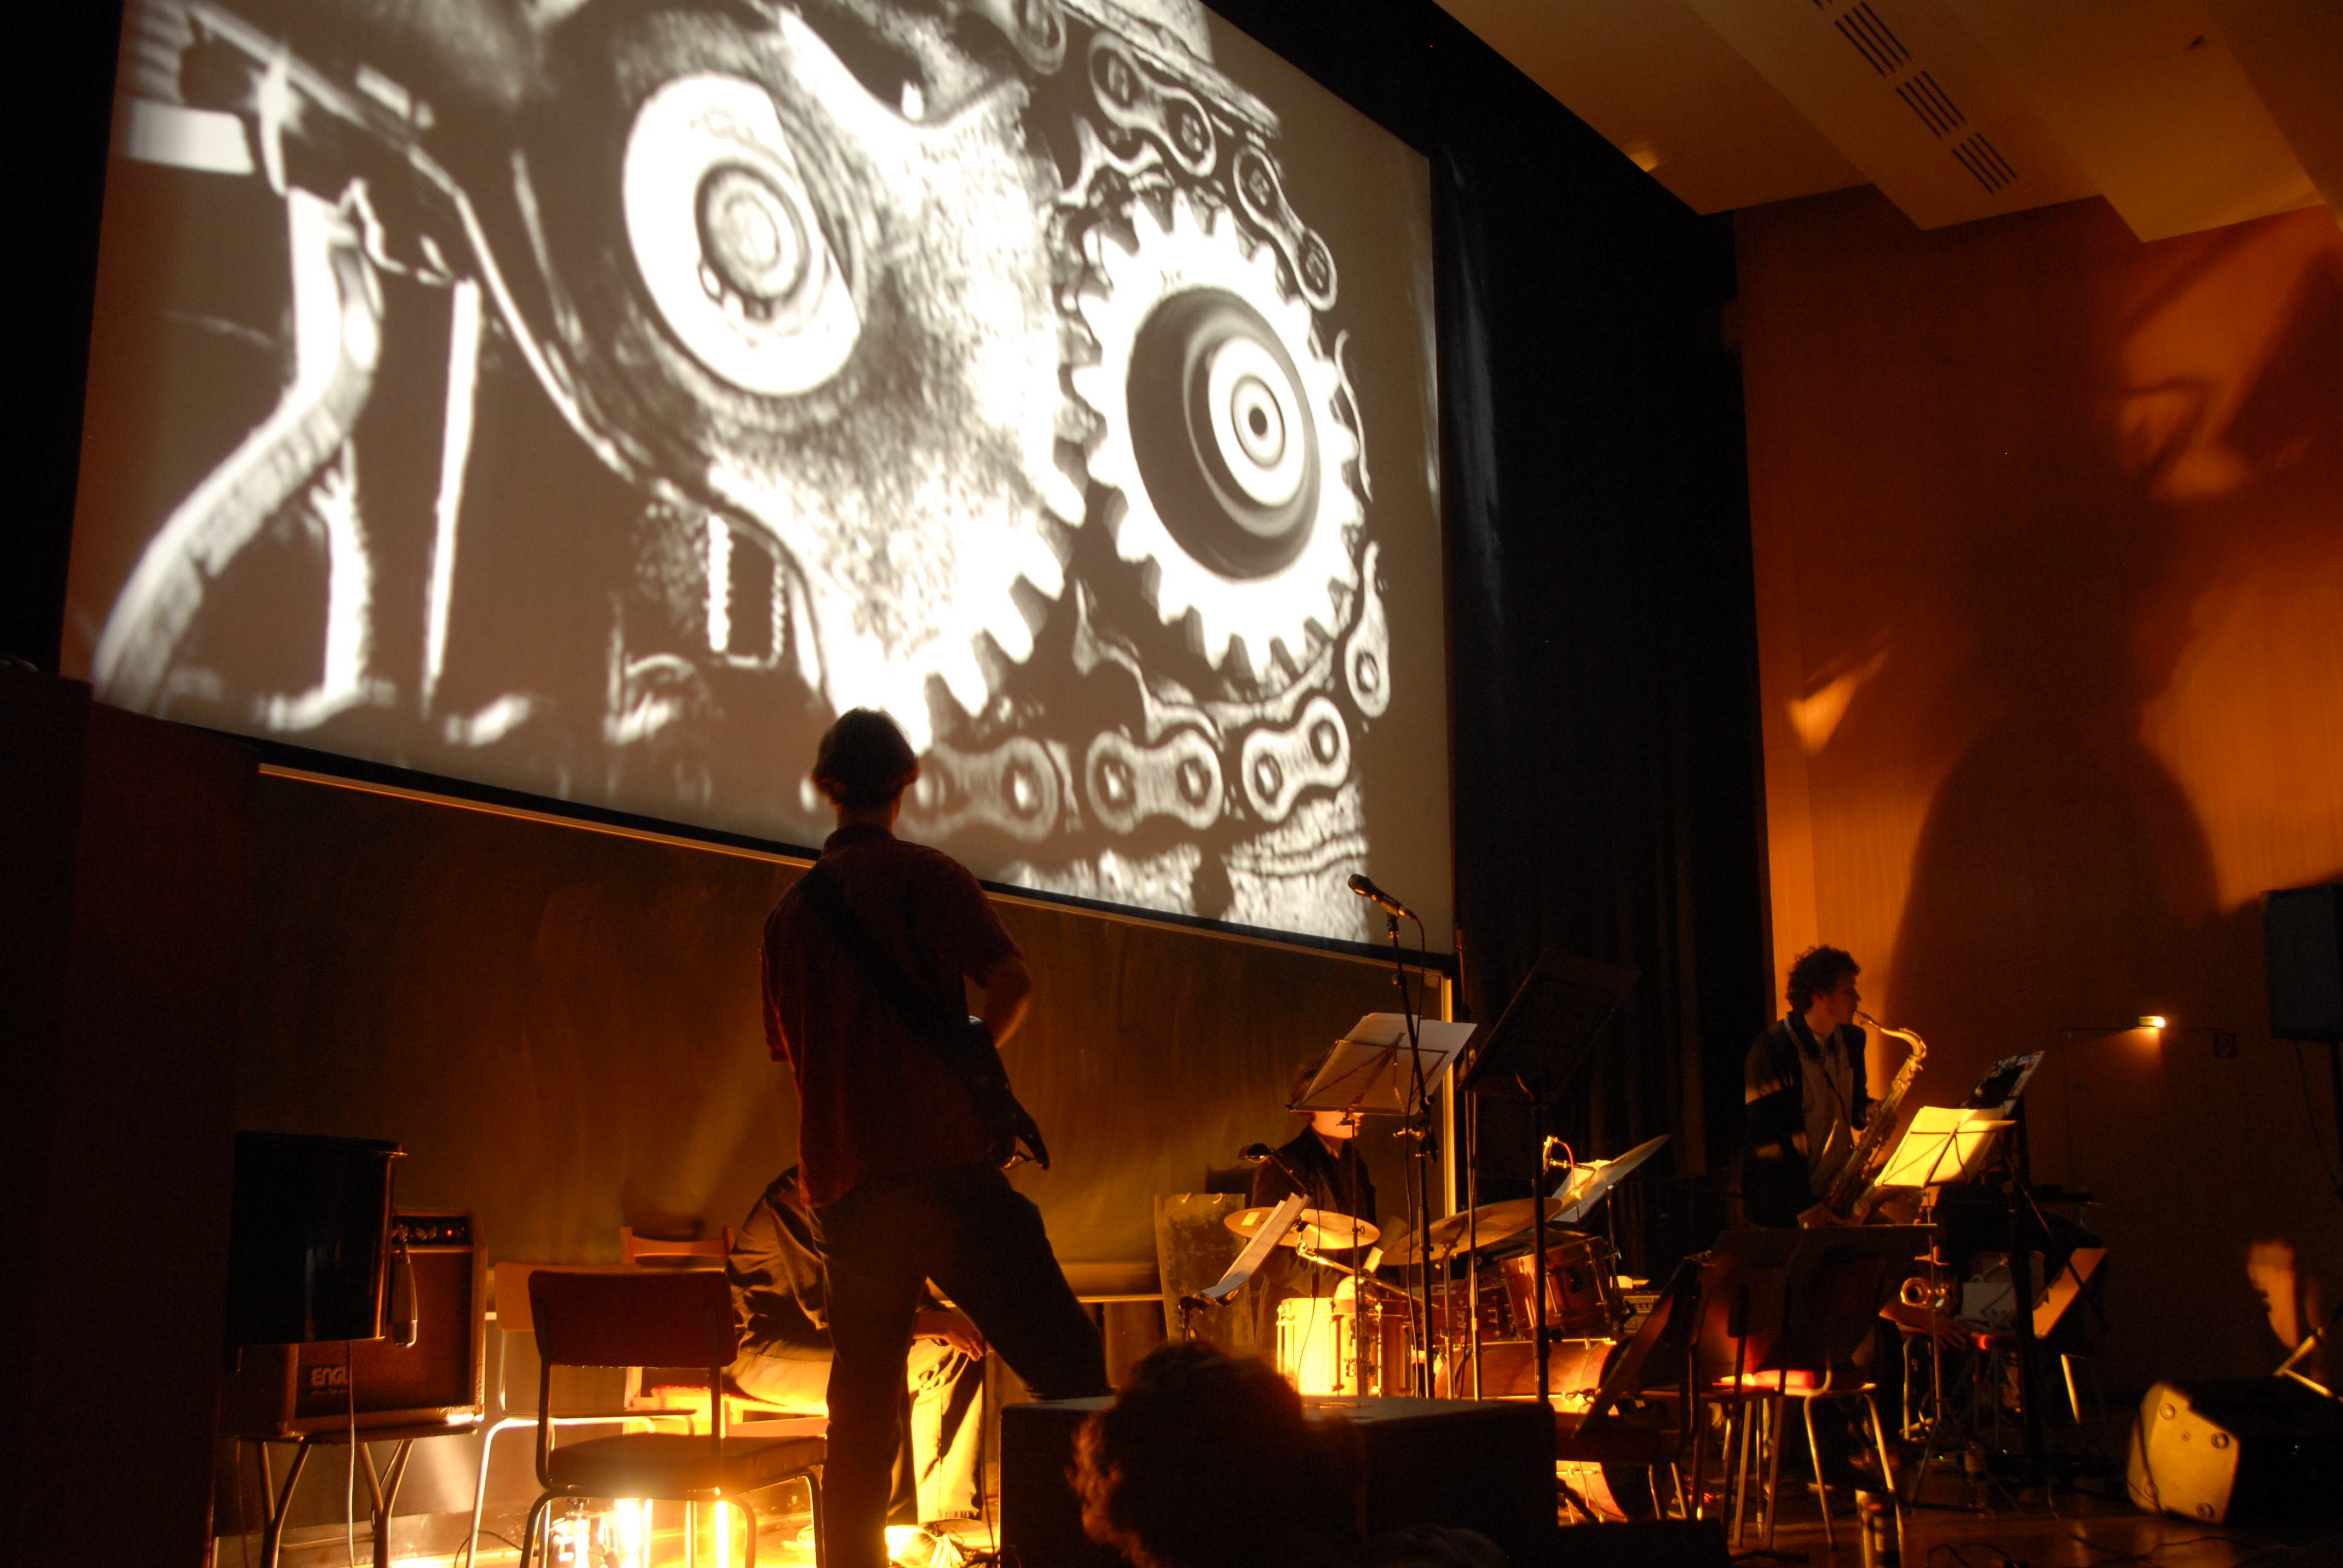 Three musicians with guitar, drums and saxophone respectively on a stage in front of a cinema screen.